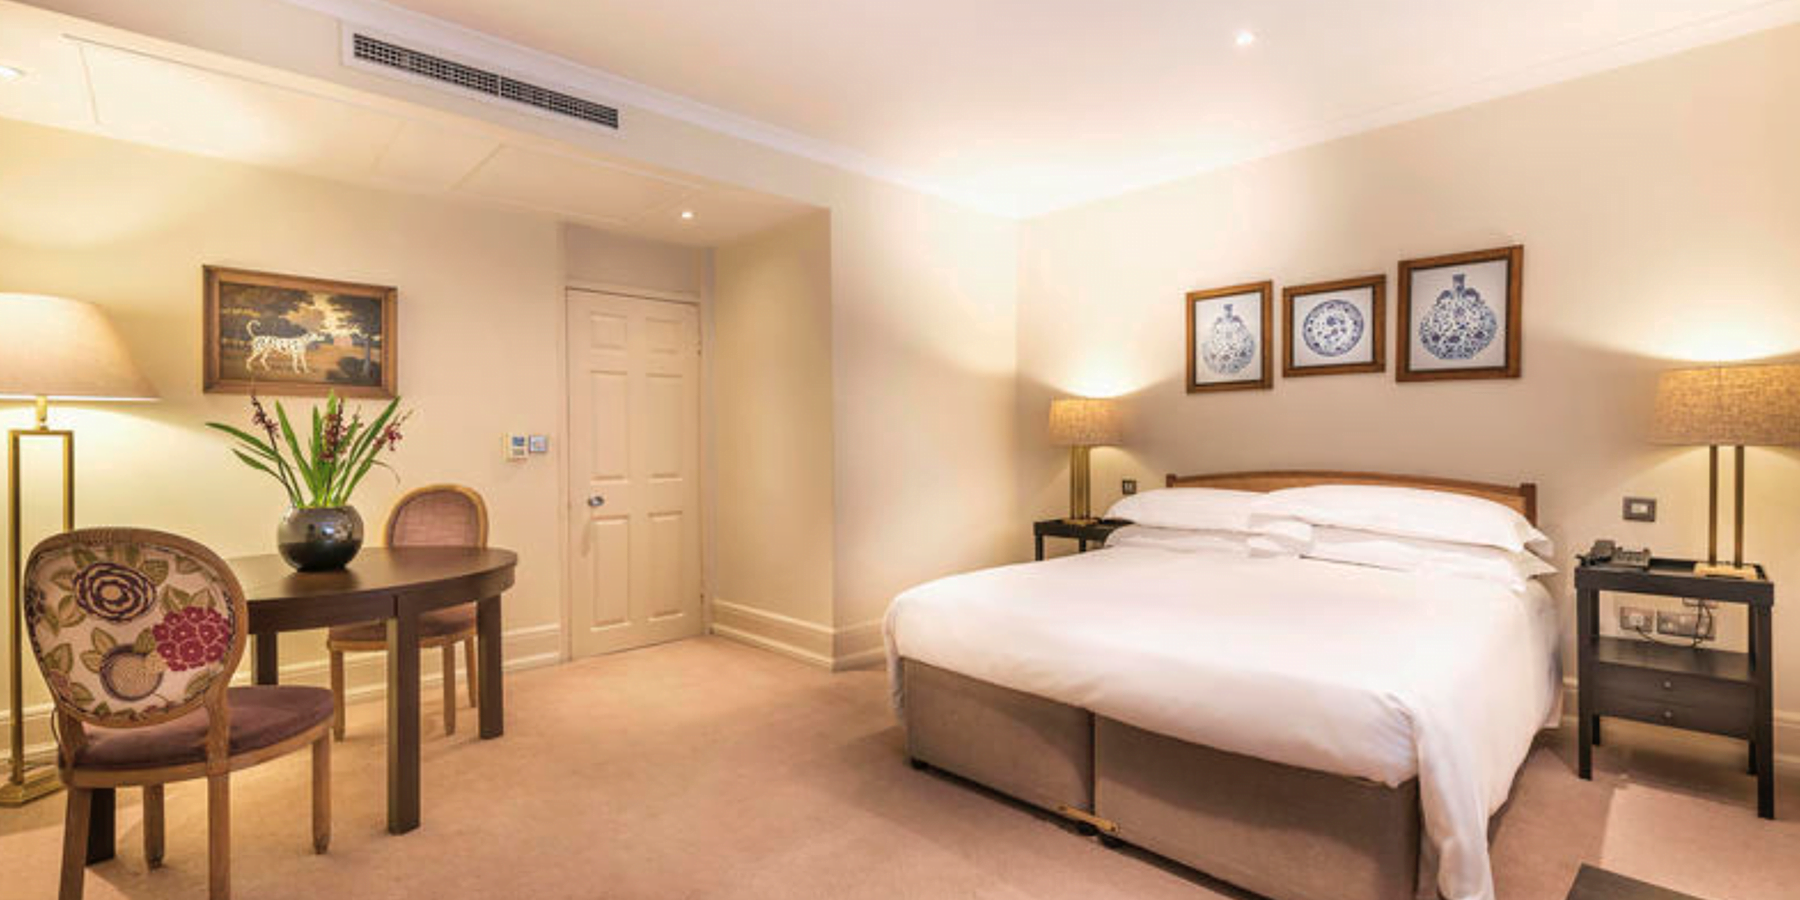 Capital Hotel bedroom with king size bed